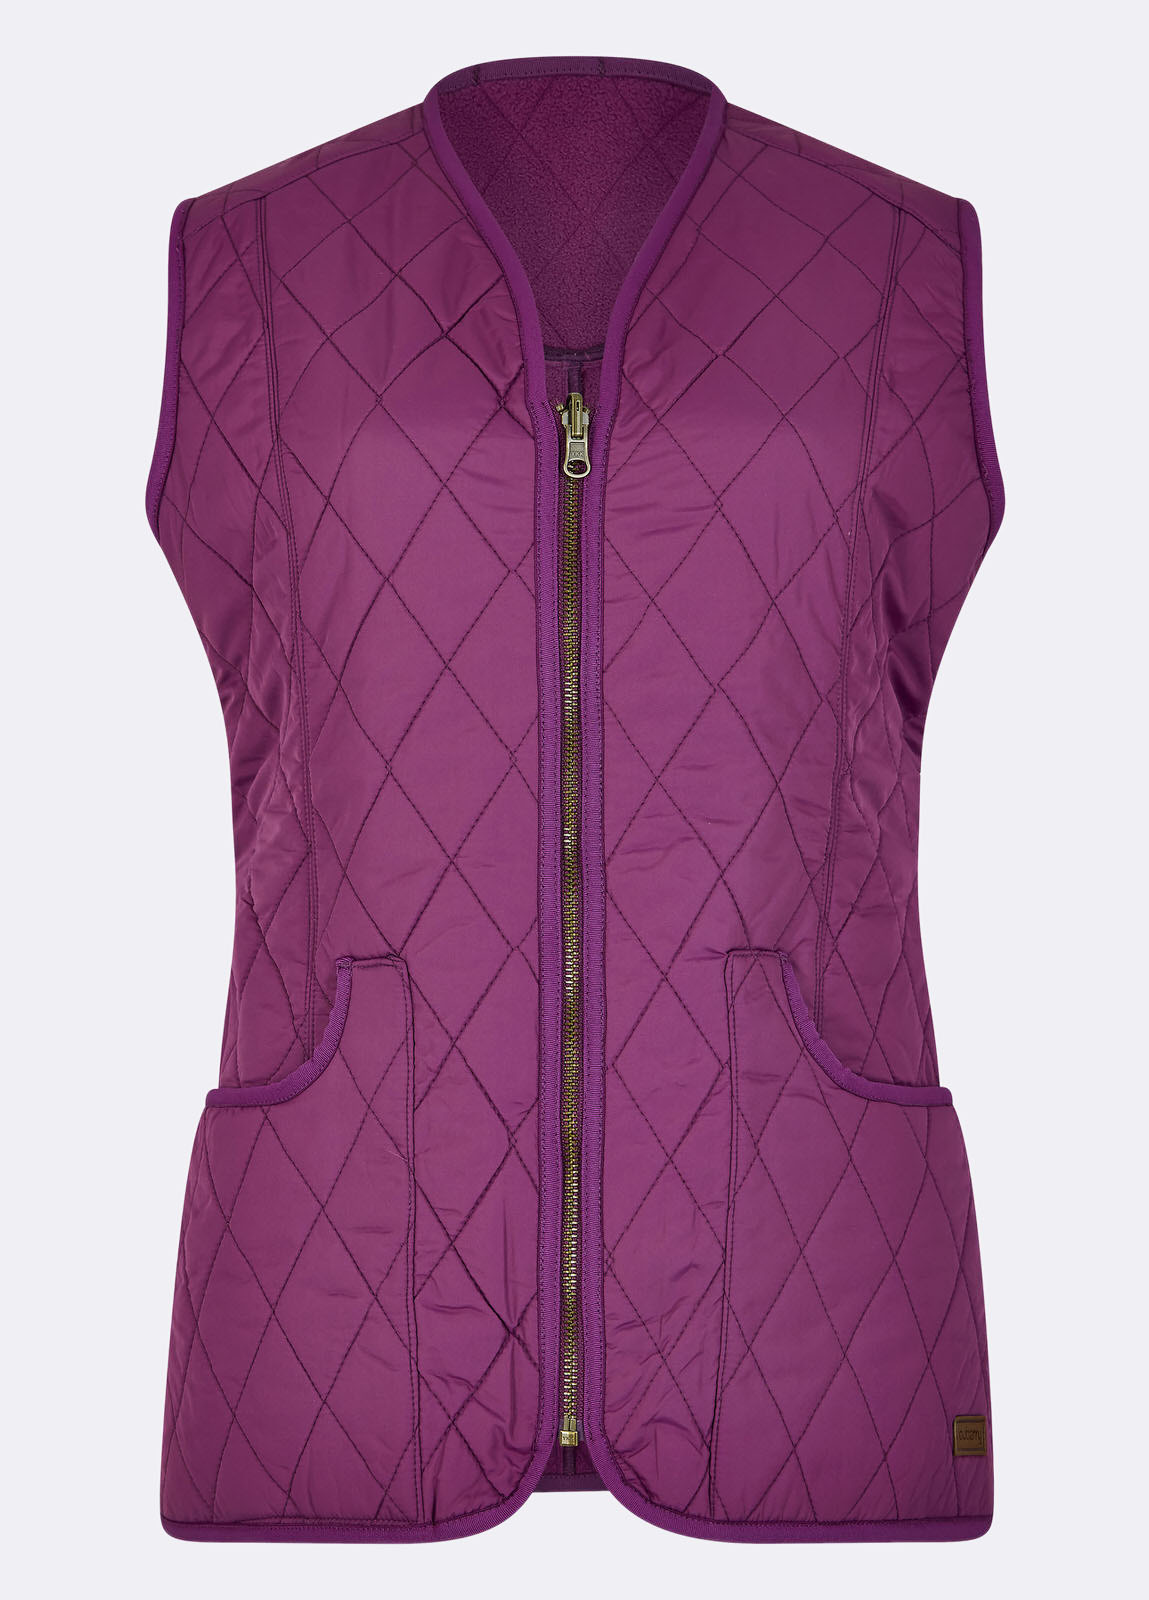 Kilruddery Quiled Gilet - Berry